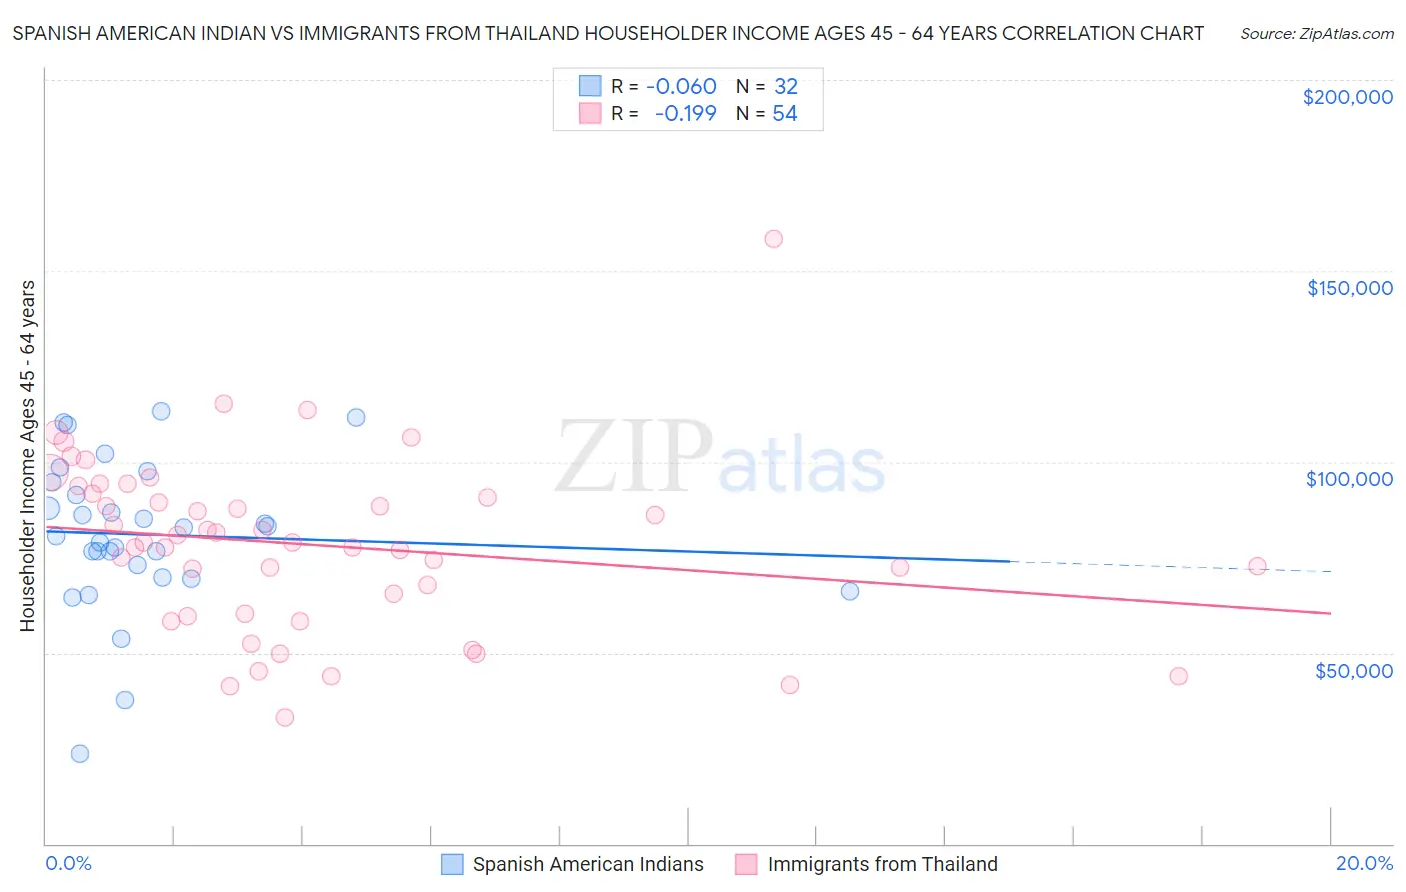 Spanish American Indian vs Immigrants from Thailand Householder Income Ages 45 - 64 years